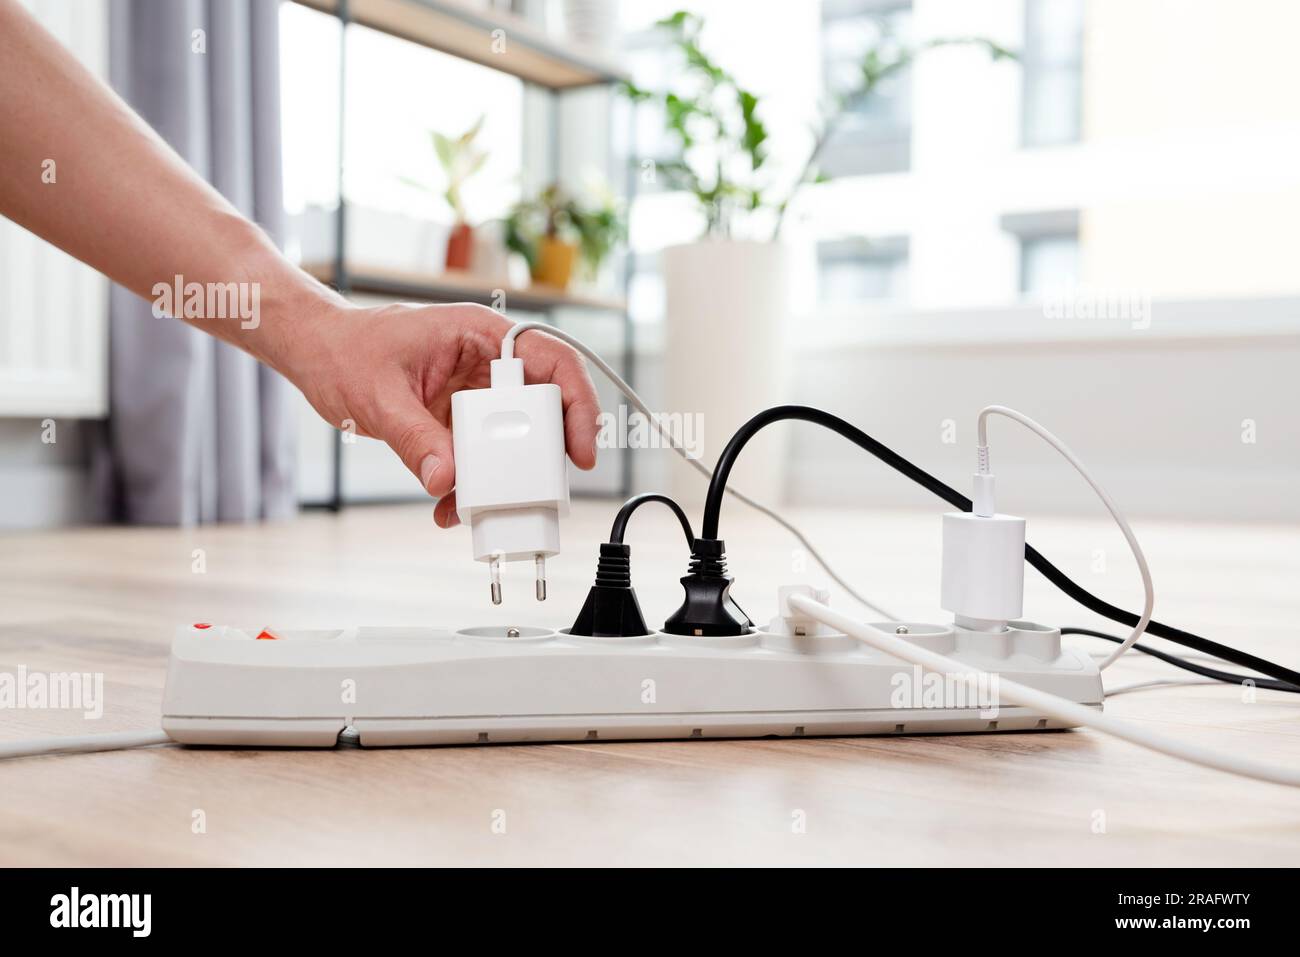 Electrical plug in outlet socket at home. Energy efficiency concept Stock Photo